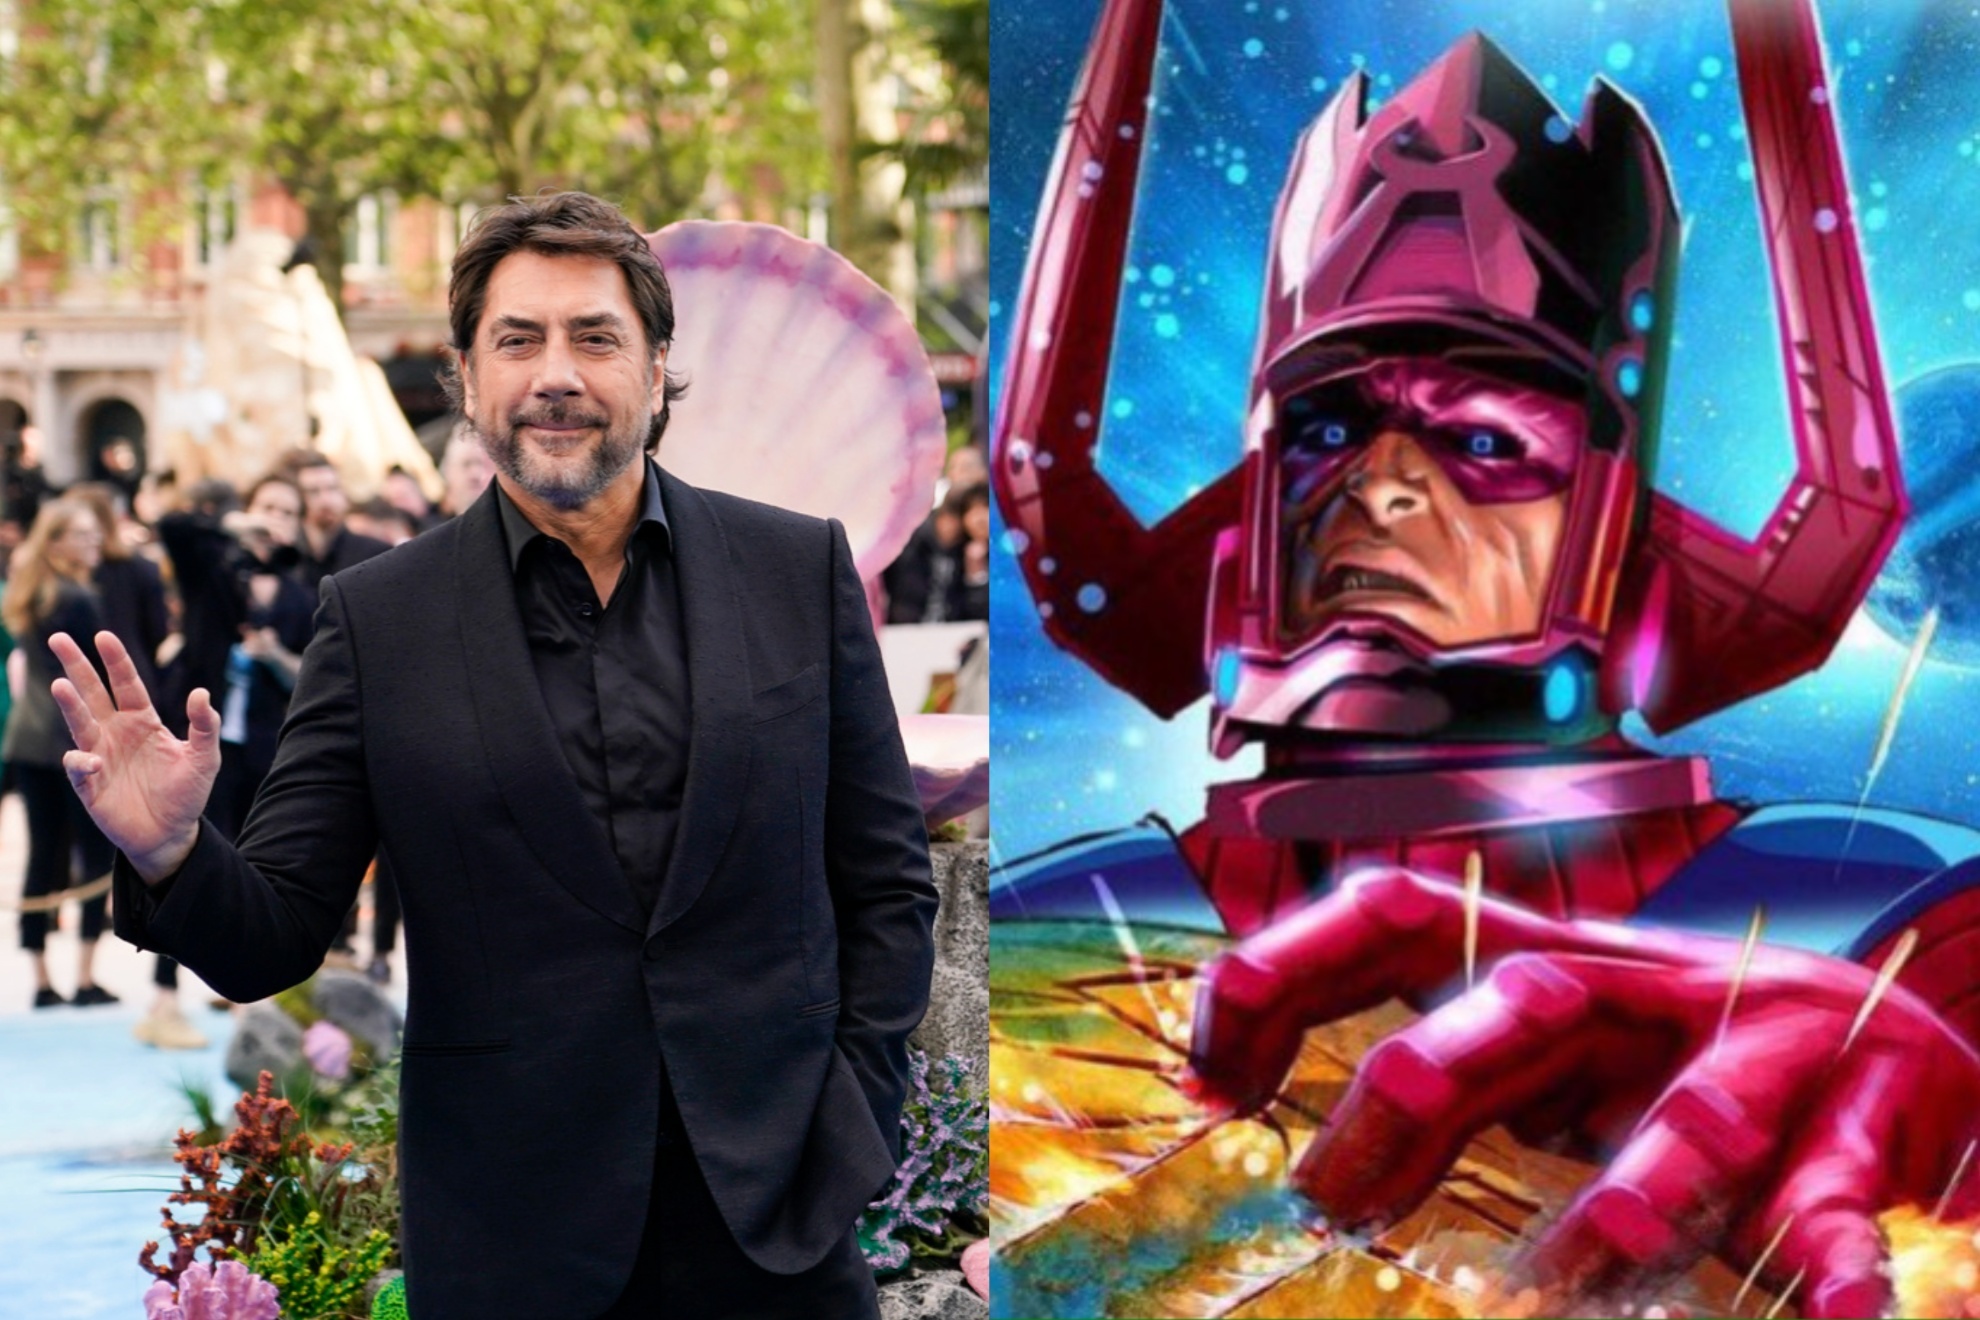 Javier Bardem could play Galactus in the MCU.